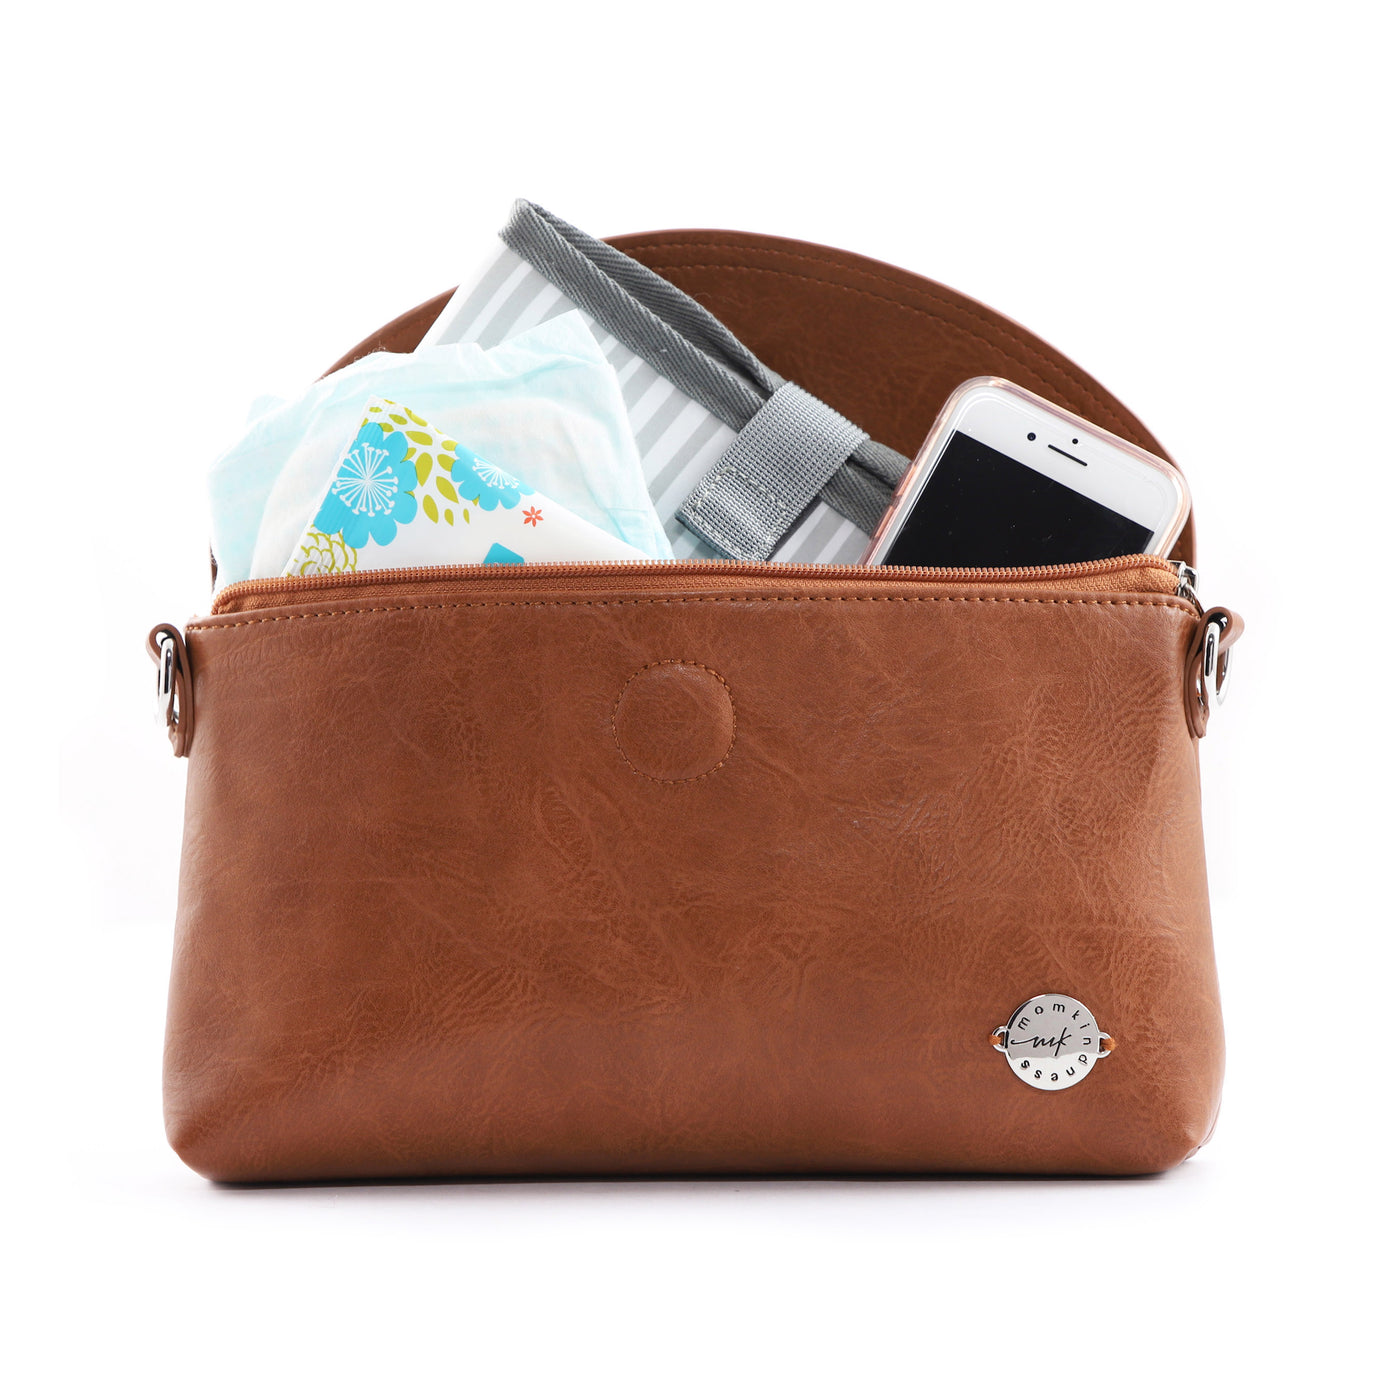 Brown vegan diaper clutch shown open and filled with diapers, wipes, phone and changing pad.